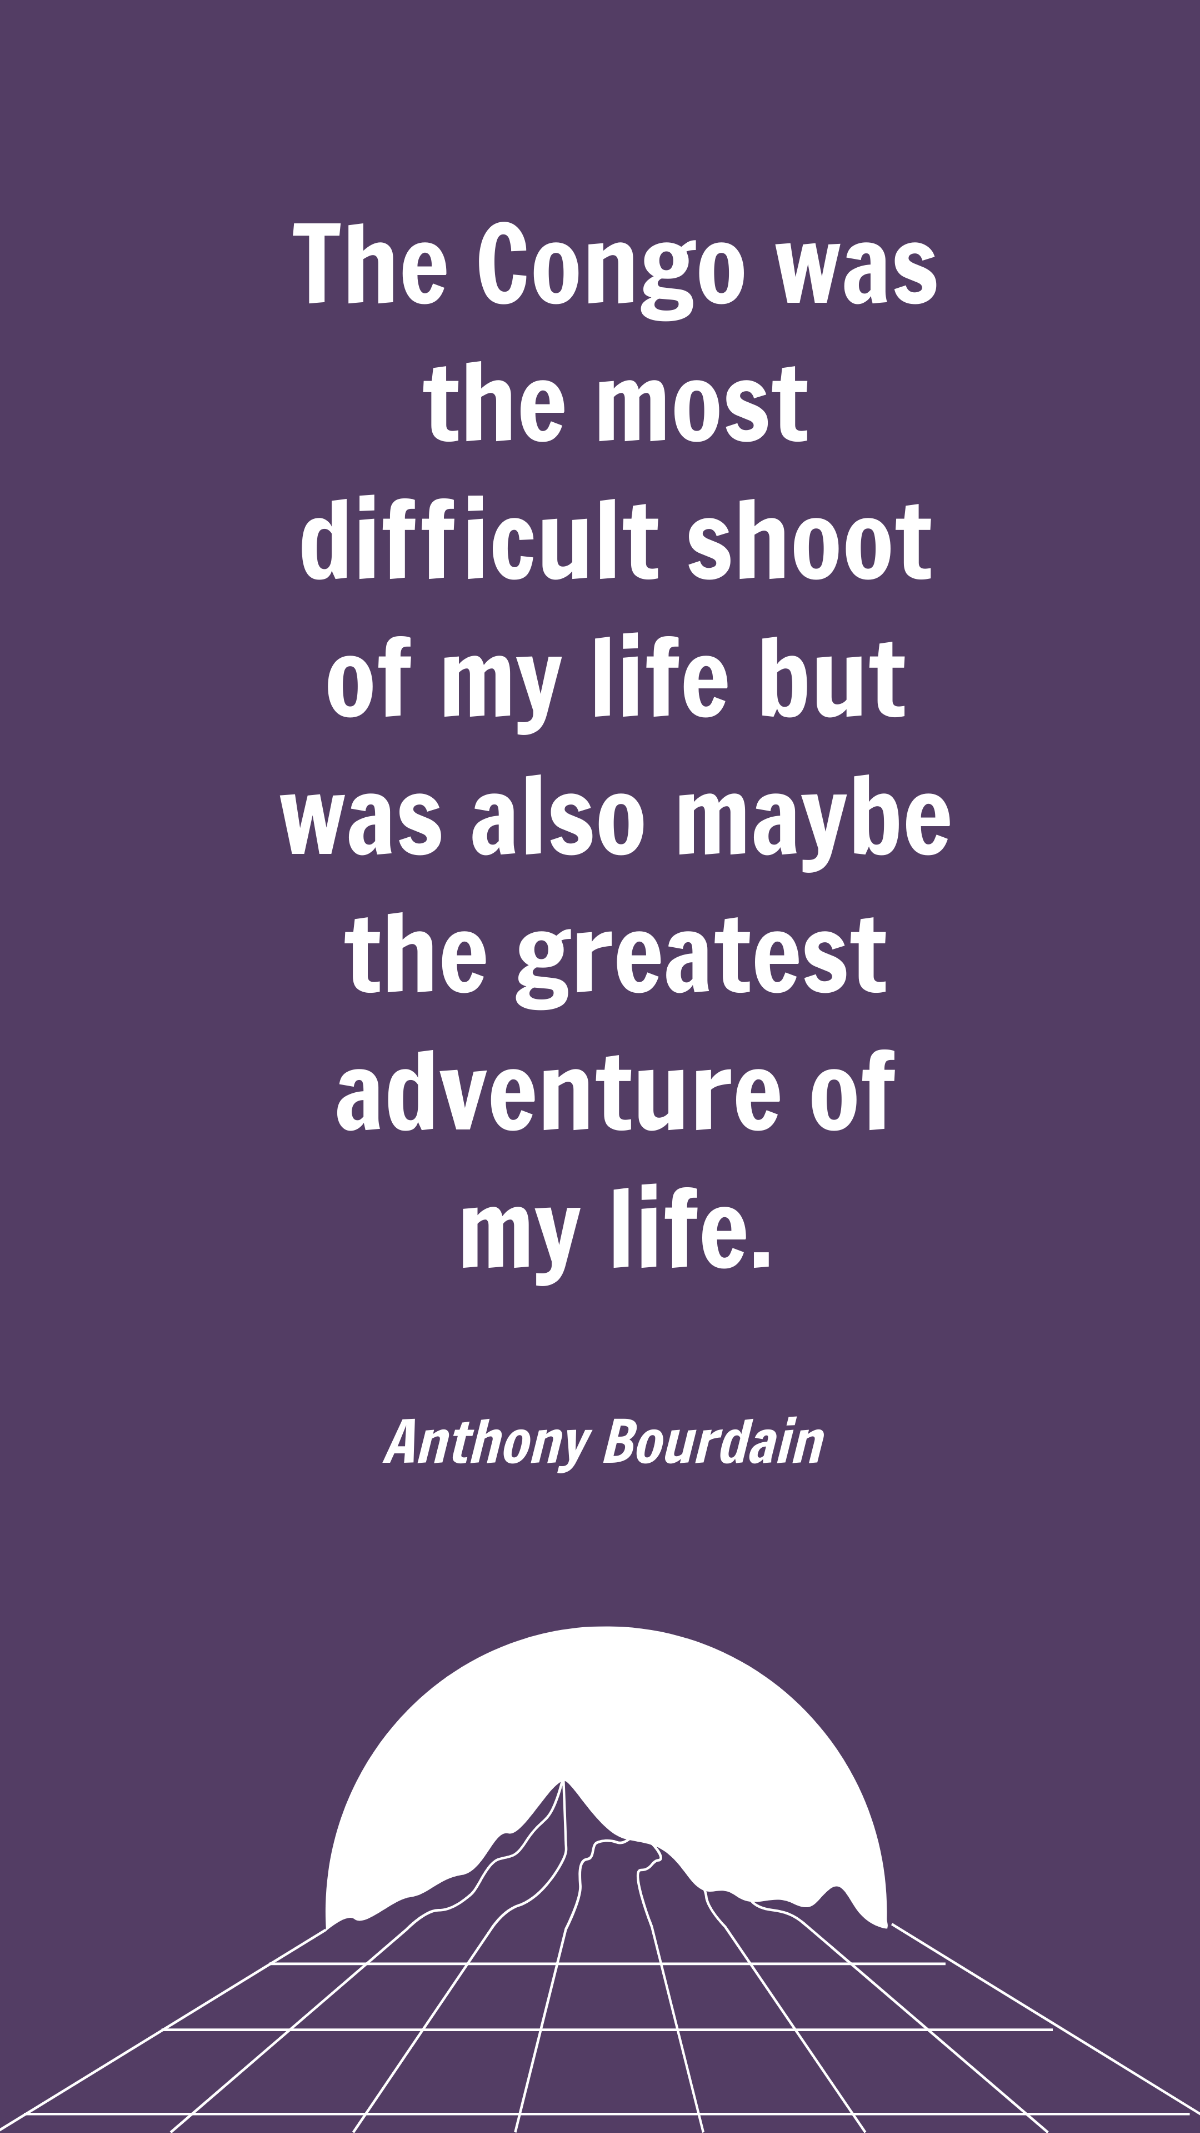 Anthony Bourdain - The Congo was the most difficult shoot of my life but was also maybe the greatest adventure of my life. Template